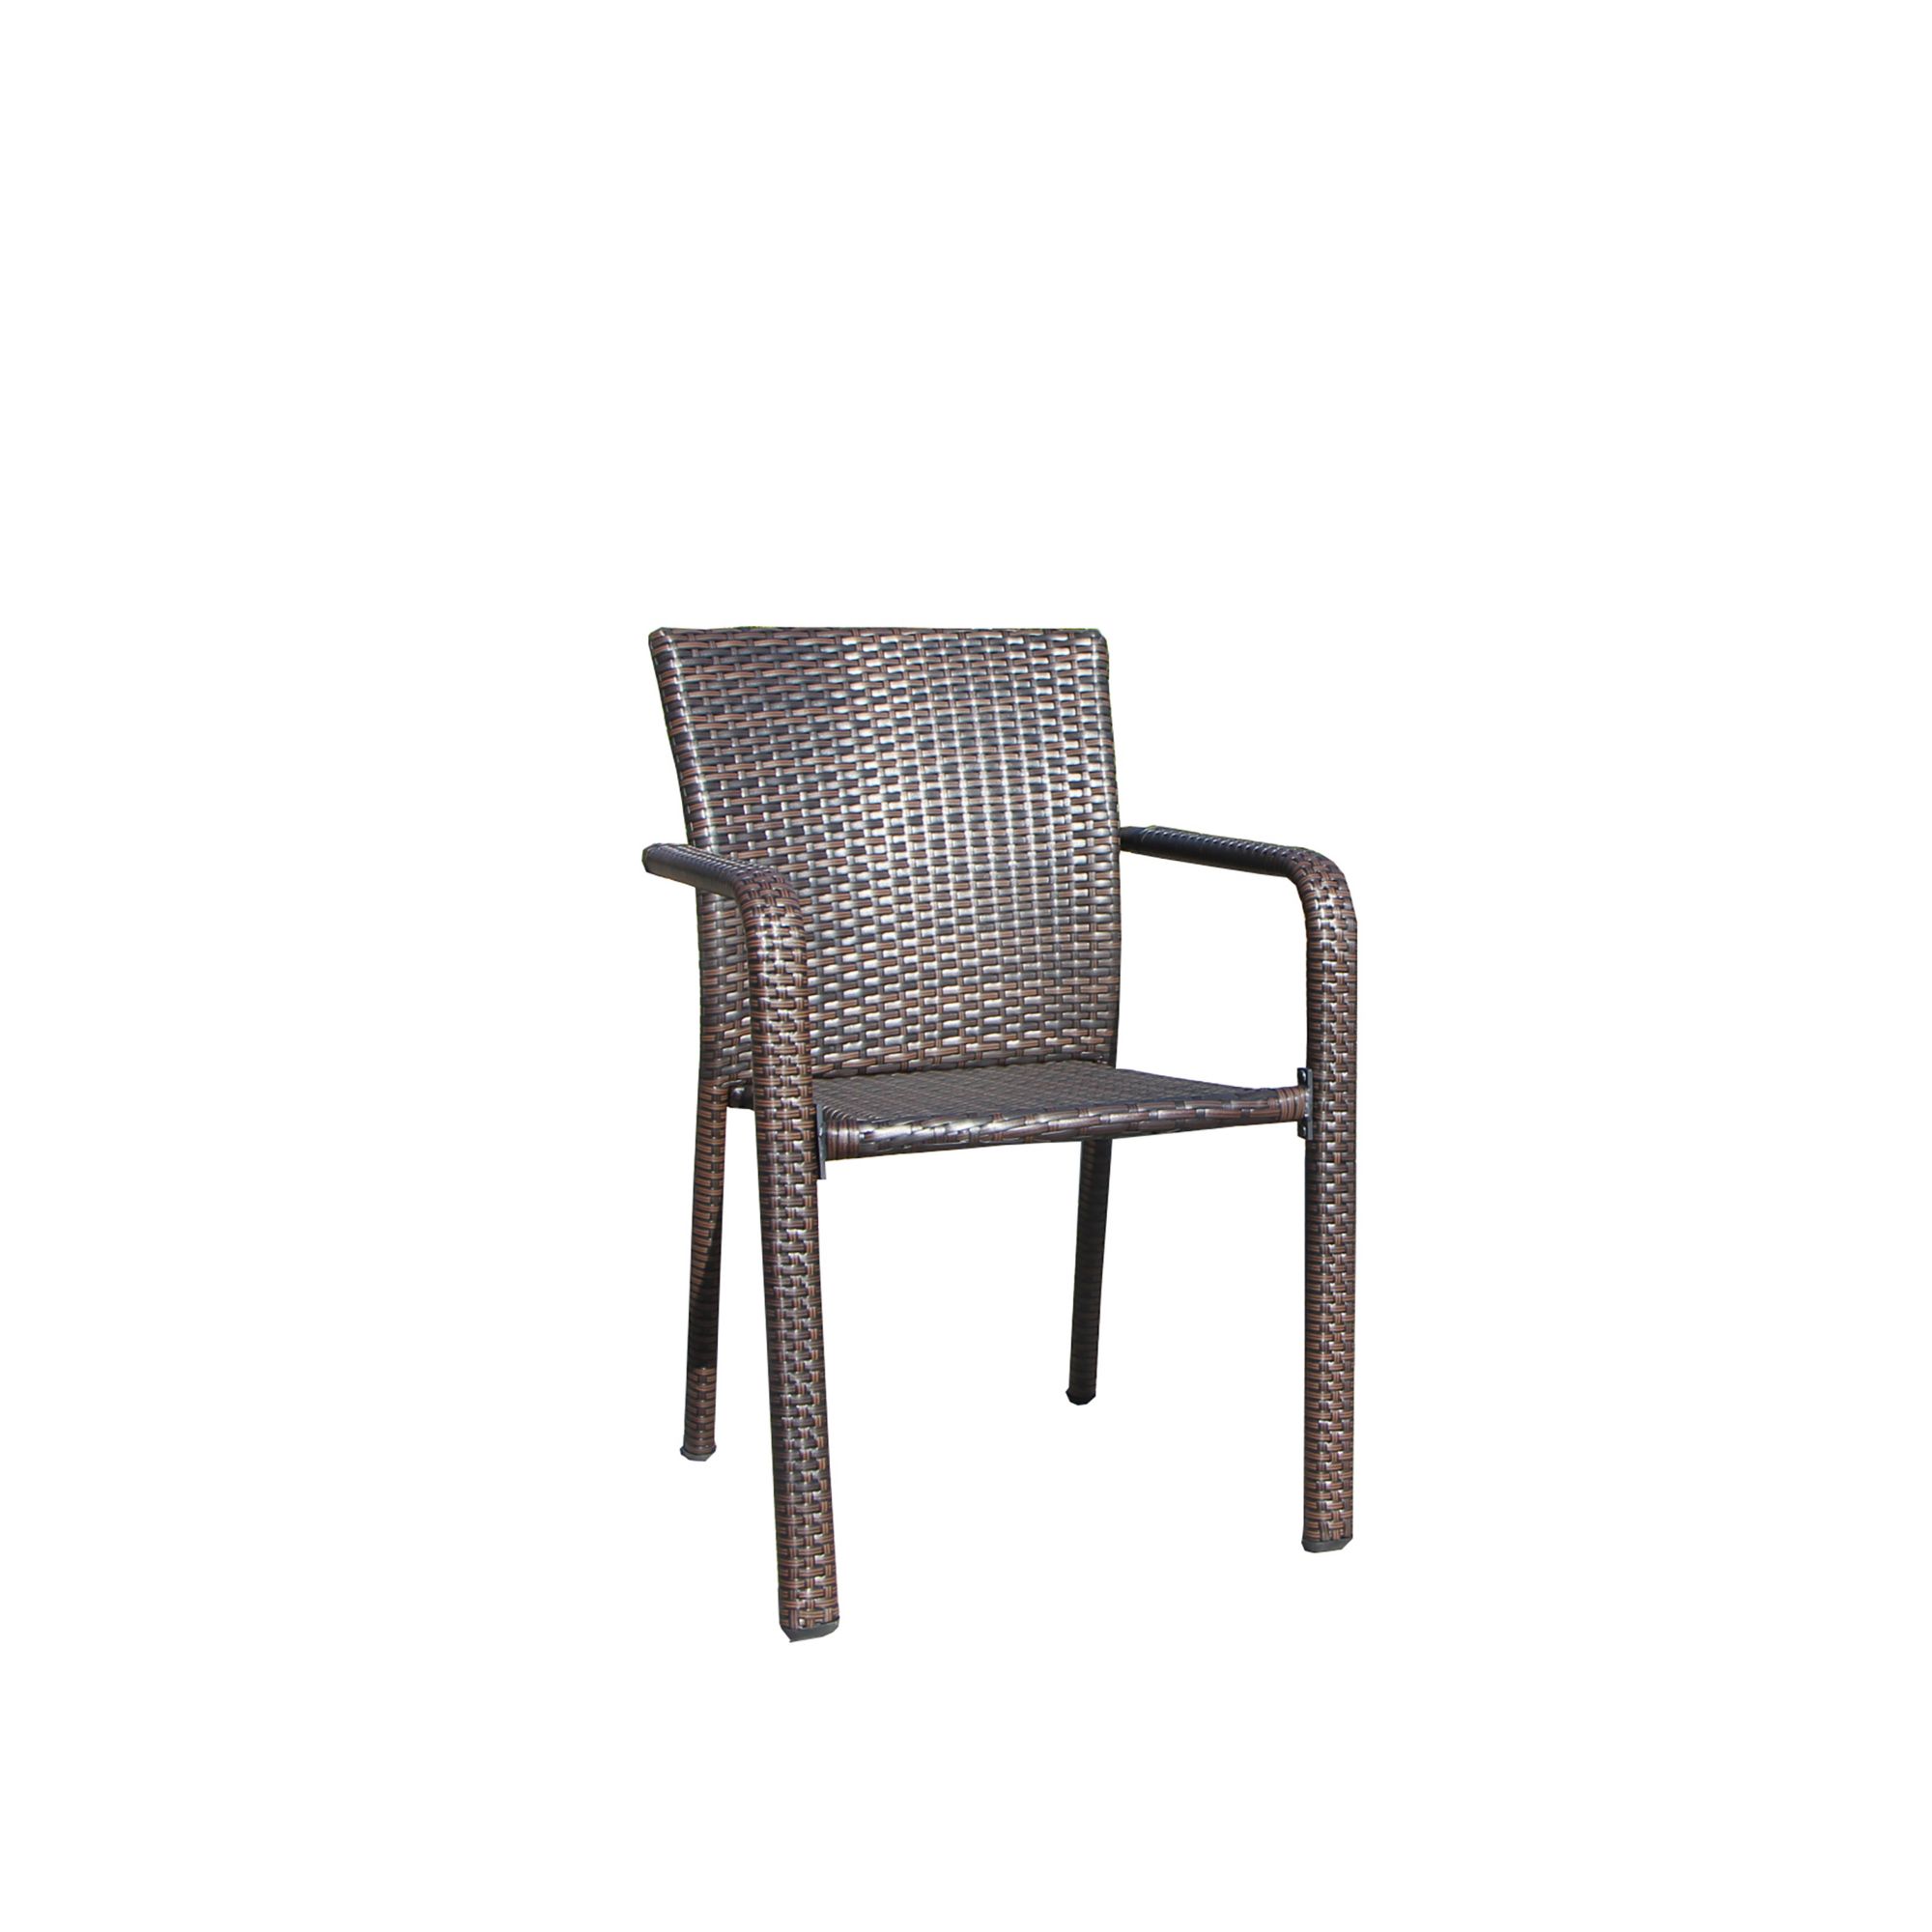 Featured image of post Cane Rocking Chair Price In Pakistan - Ensure that you, your family, friends and guests always have a multitude of comfortable seating options throughout your home with ikea&#039;s extensive.